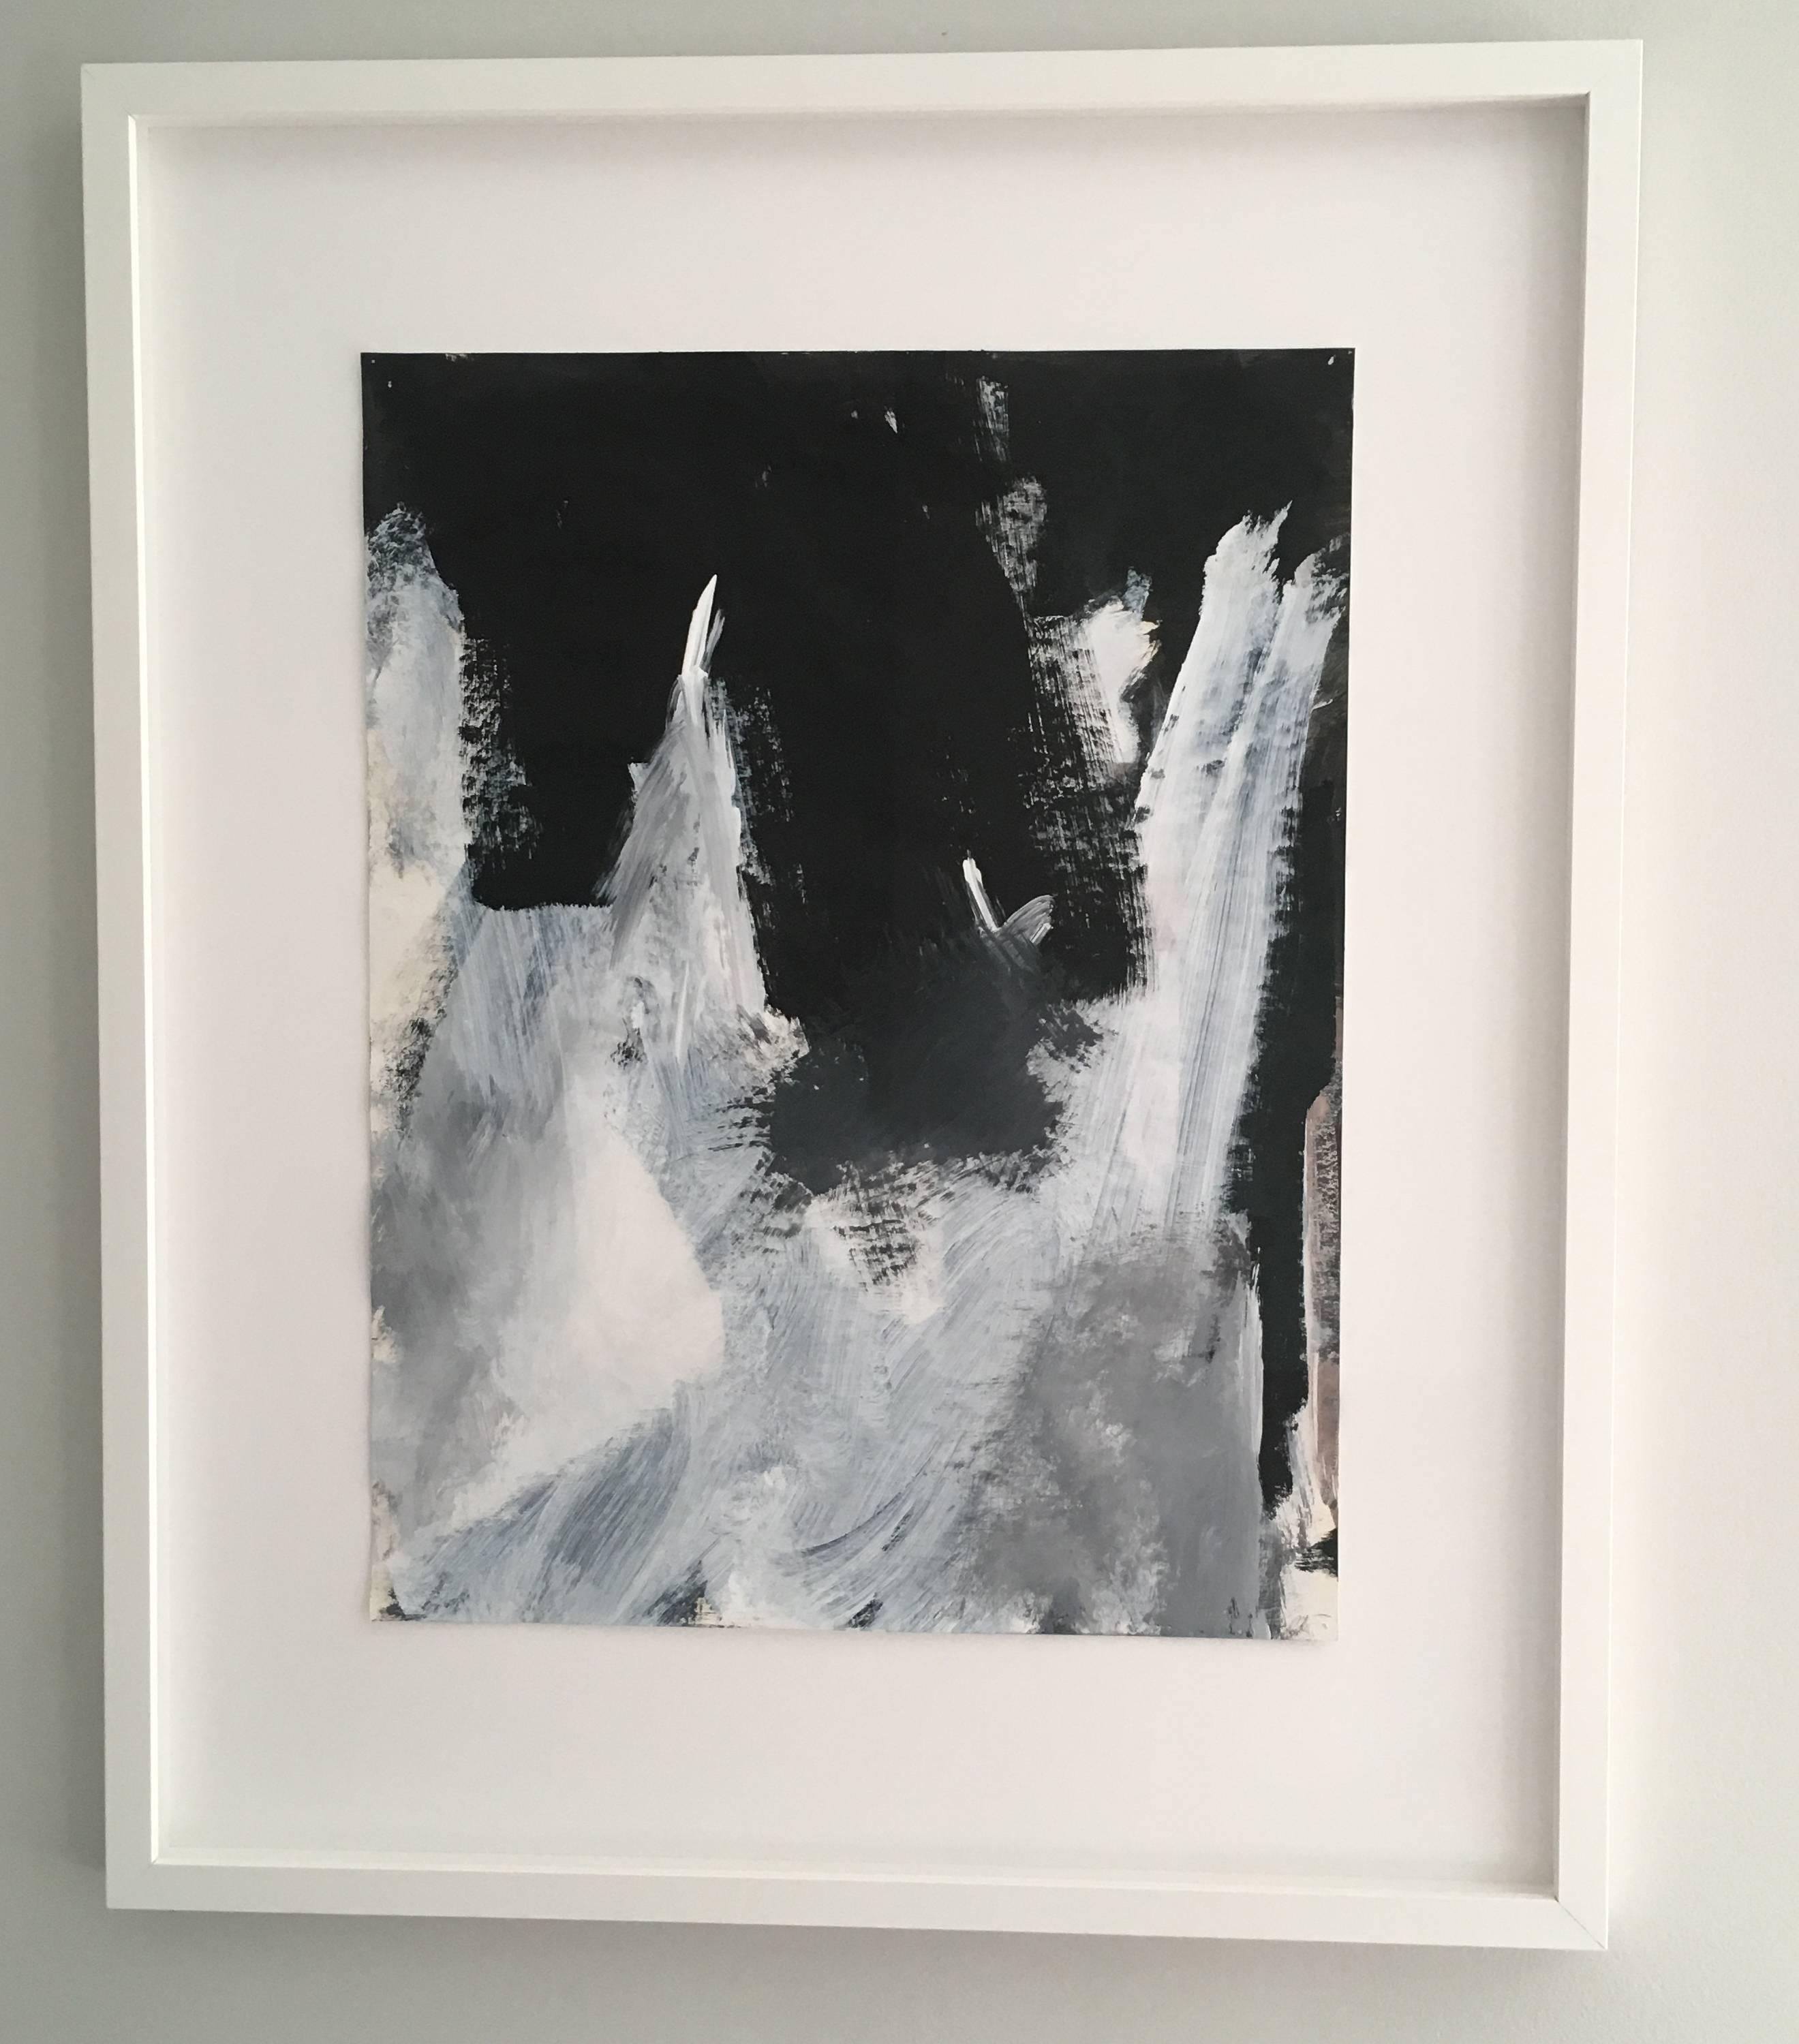 Stephanie Cate Abstract Painting - Europa 2 Study, Black & White, Abstract, Work on Paper, Framed, Outer Space,